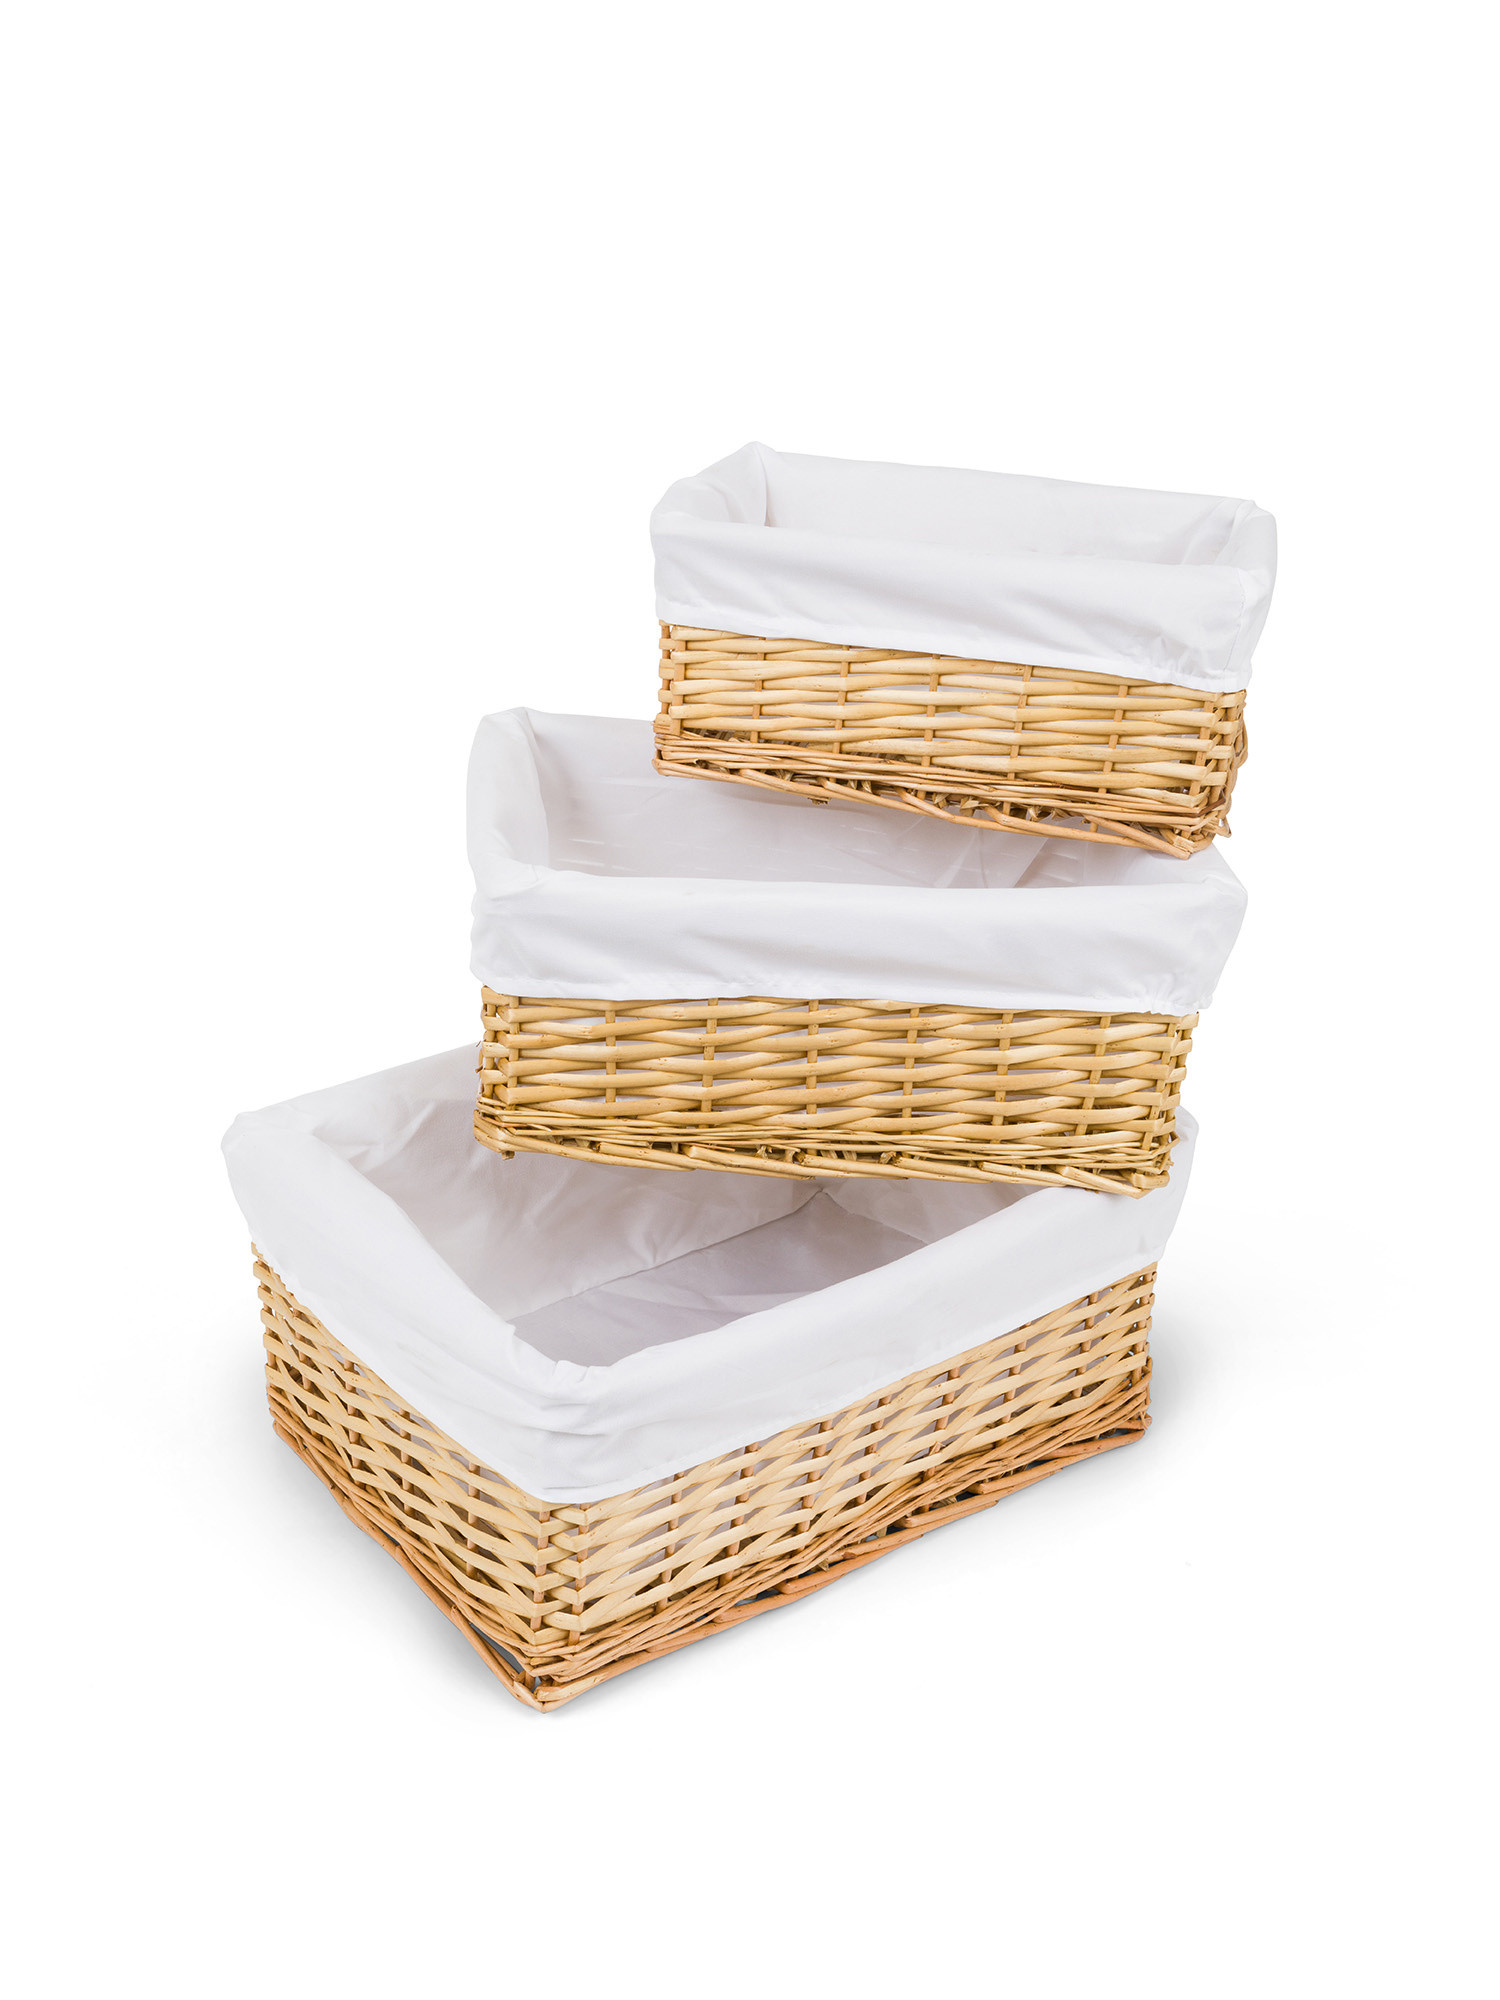 Wicker basket with lining, Natural, large image number 2